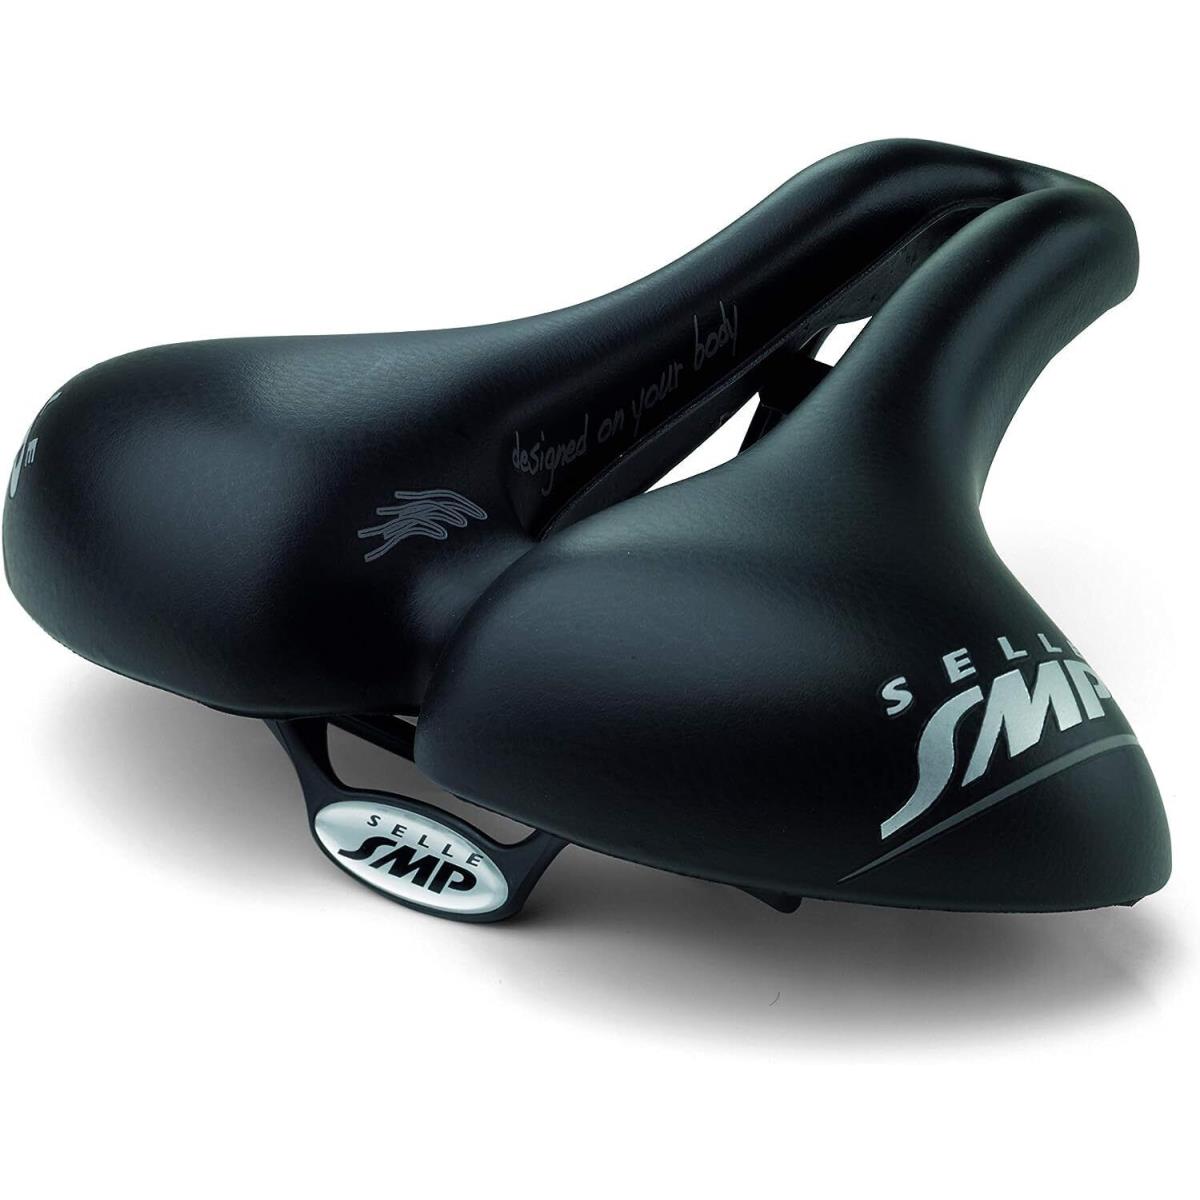 Selle Unisex Smp Trk Martin Fitness Saddles Black One Size High Quality Material